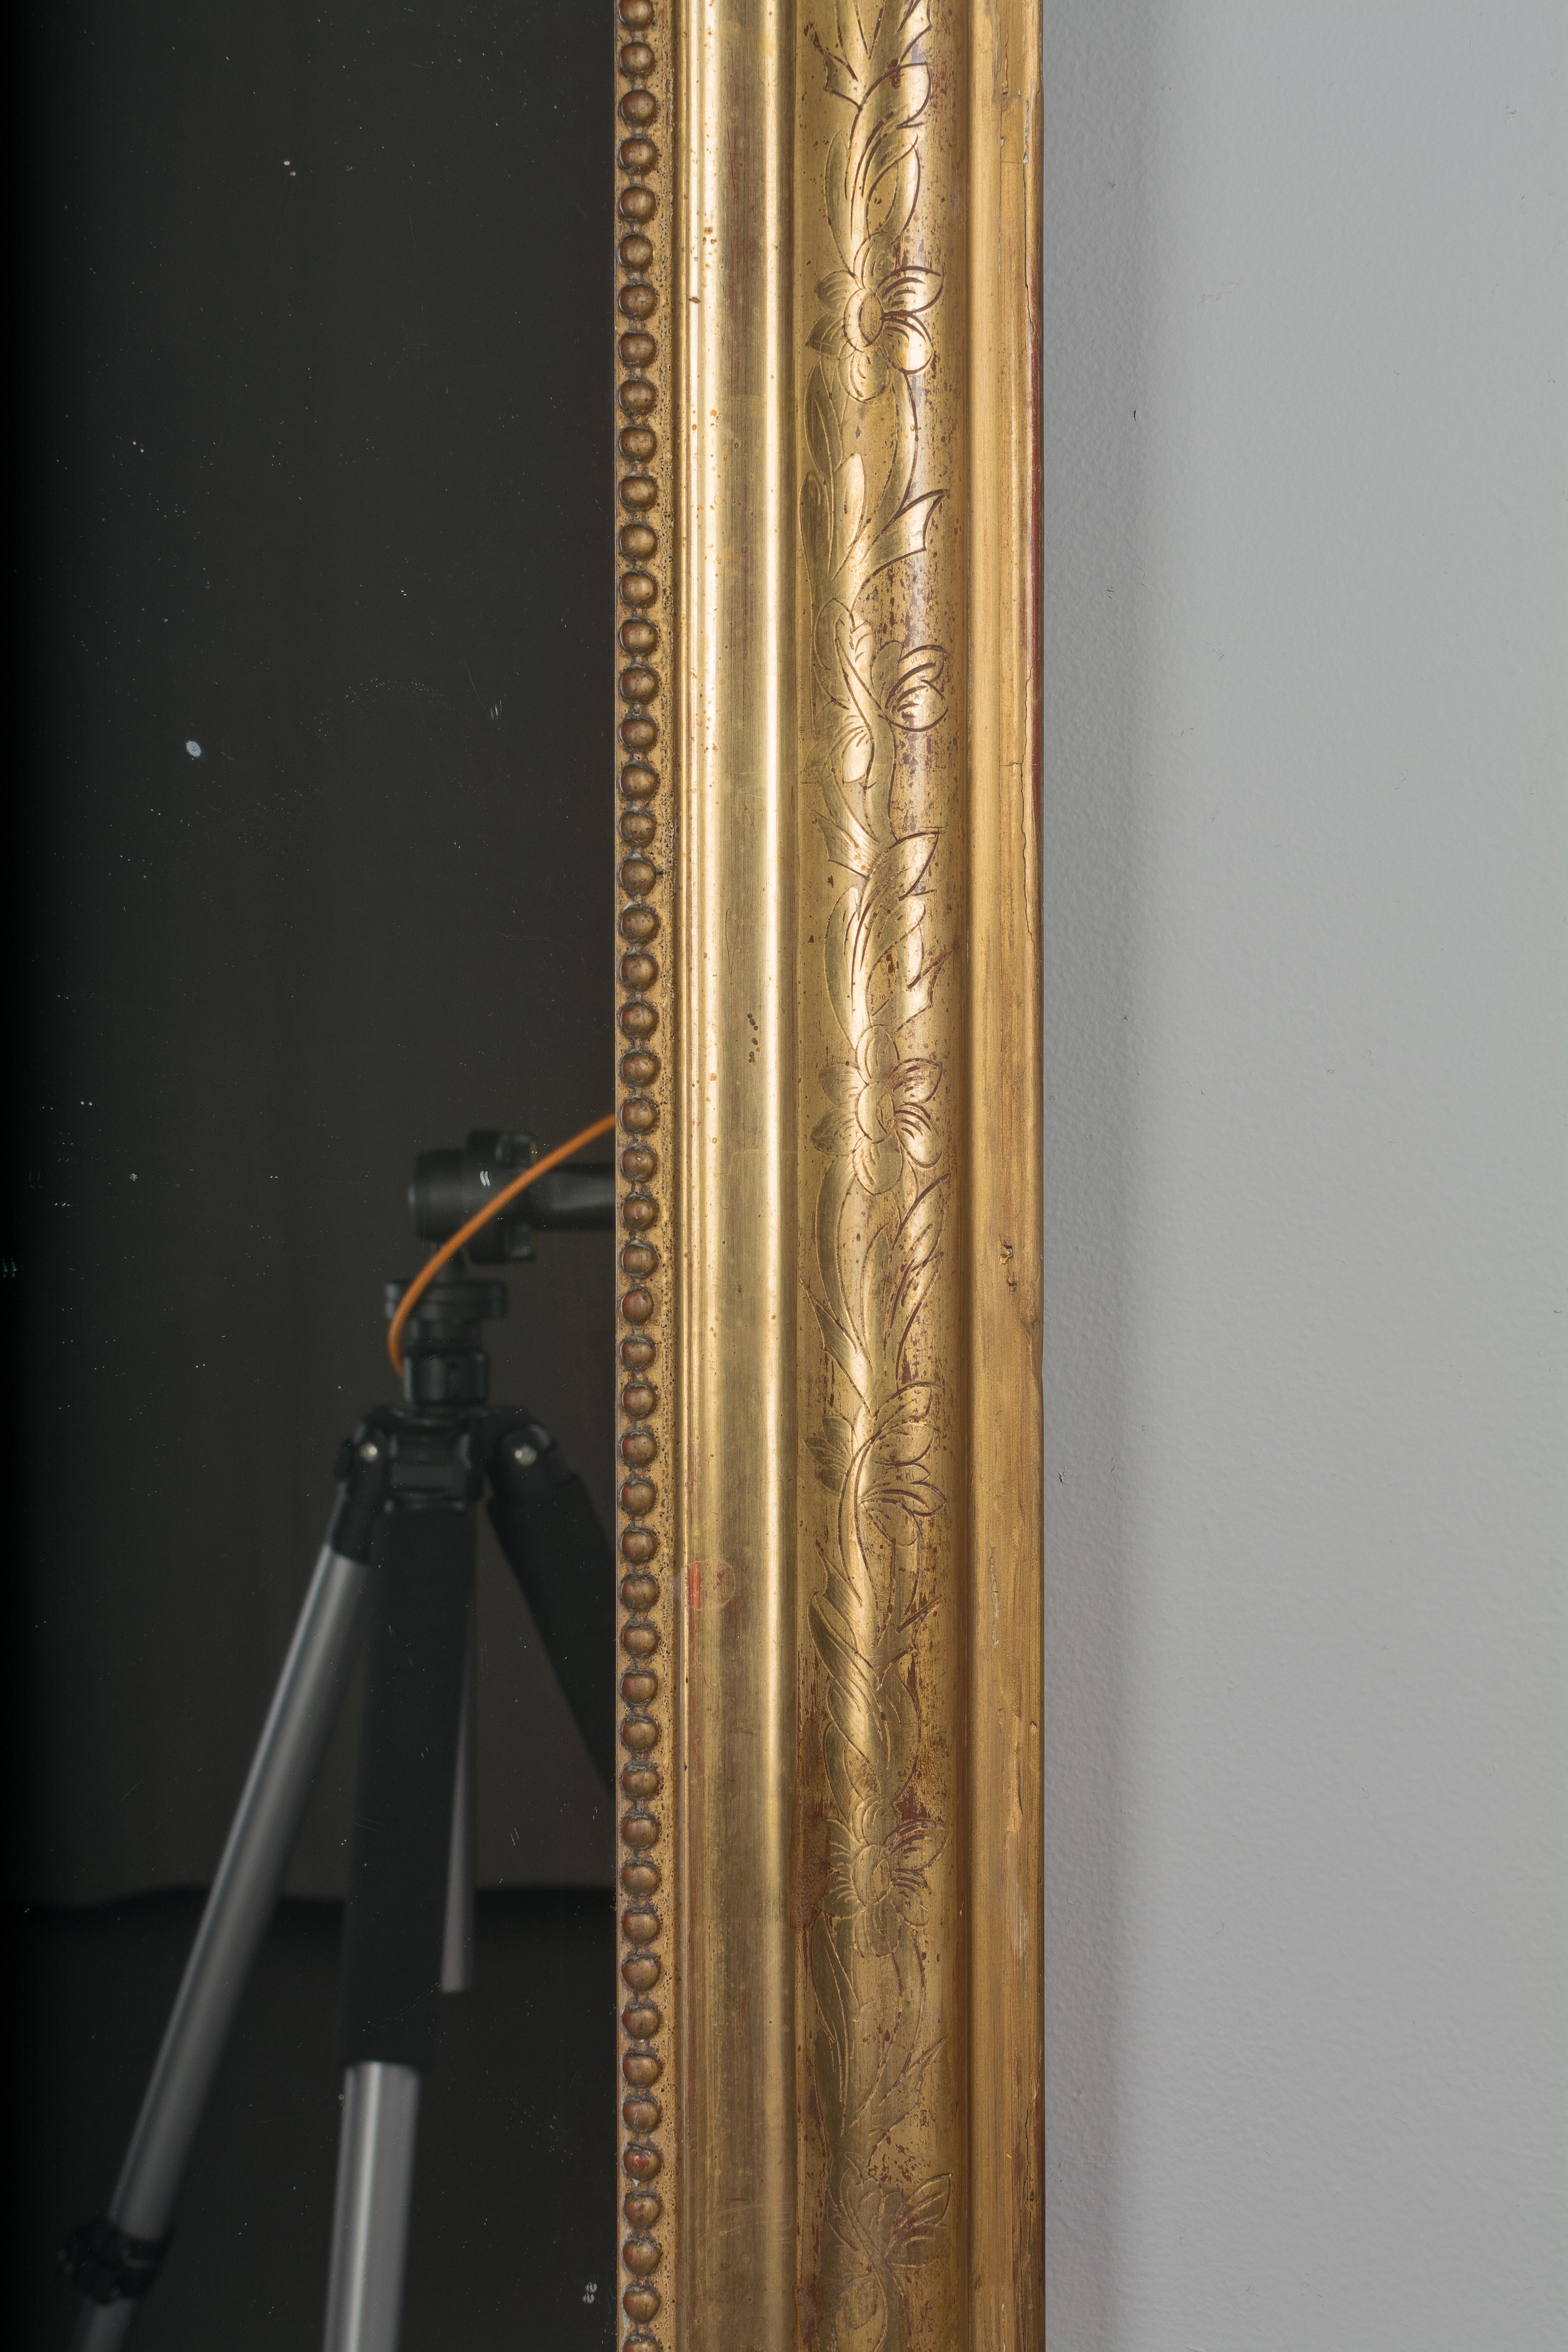 A Louis Philippe style gilded mirror with curved top corners, incised decoration and inner bead border. Warm gilt finish. Original mirror with old silvering. Frame has been restored on the bottom edge.